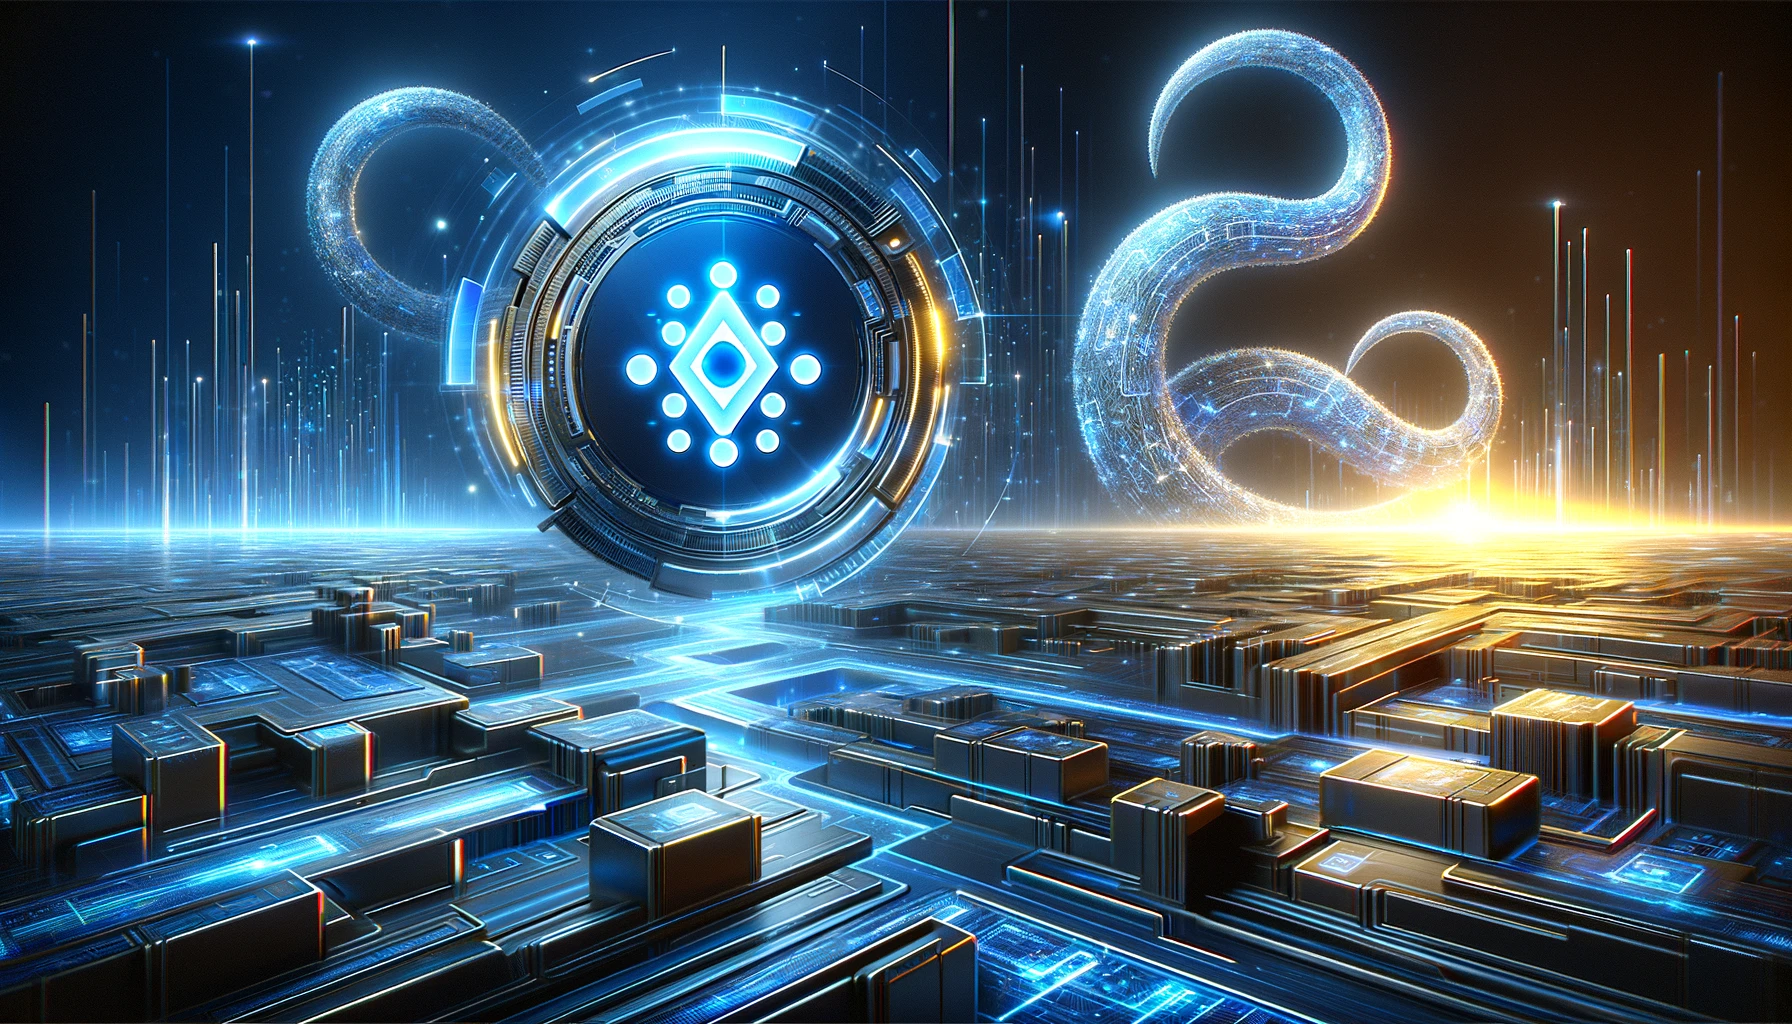 Cardano’s Hoskinson Reveals Game-Changing Upgrades: Introducing ‘Chang’ and ‘Ouroboros Leios